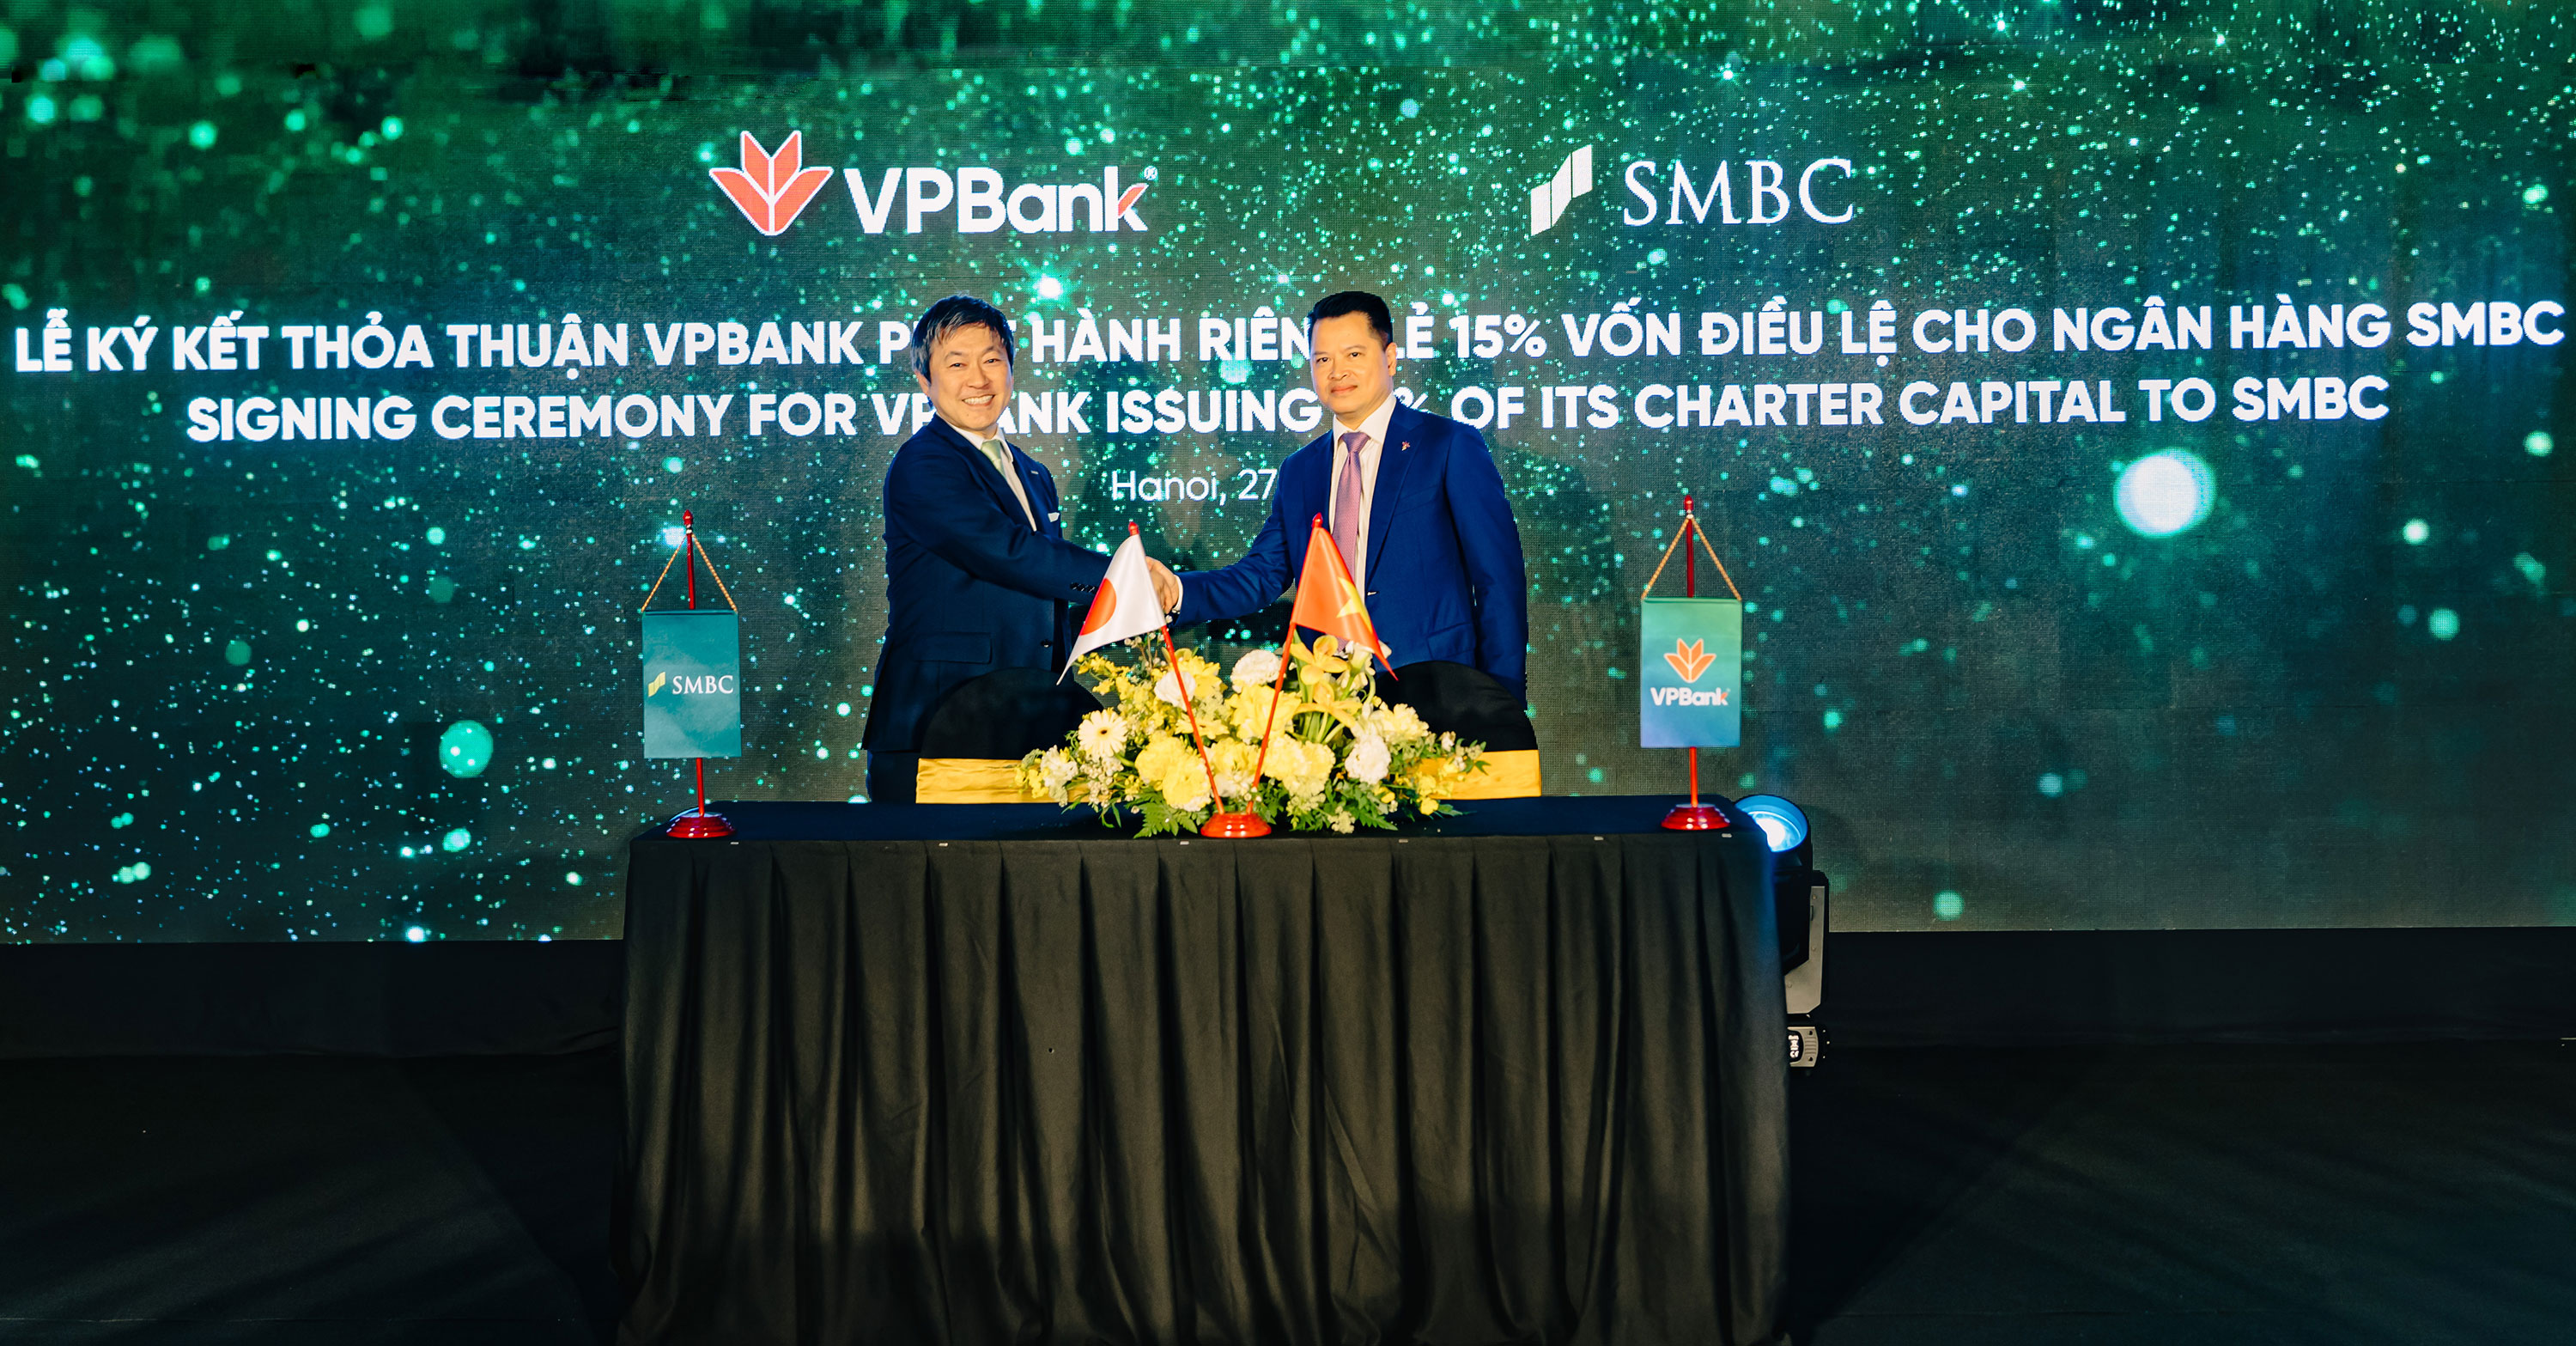 Vietnam’s VPBank announces agreement to issue 15% of its charter capital to Japan’s SMBC